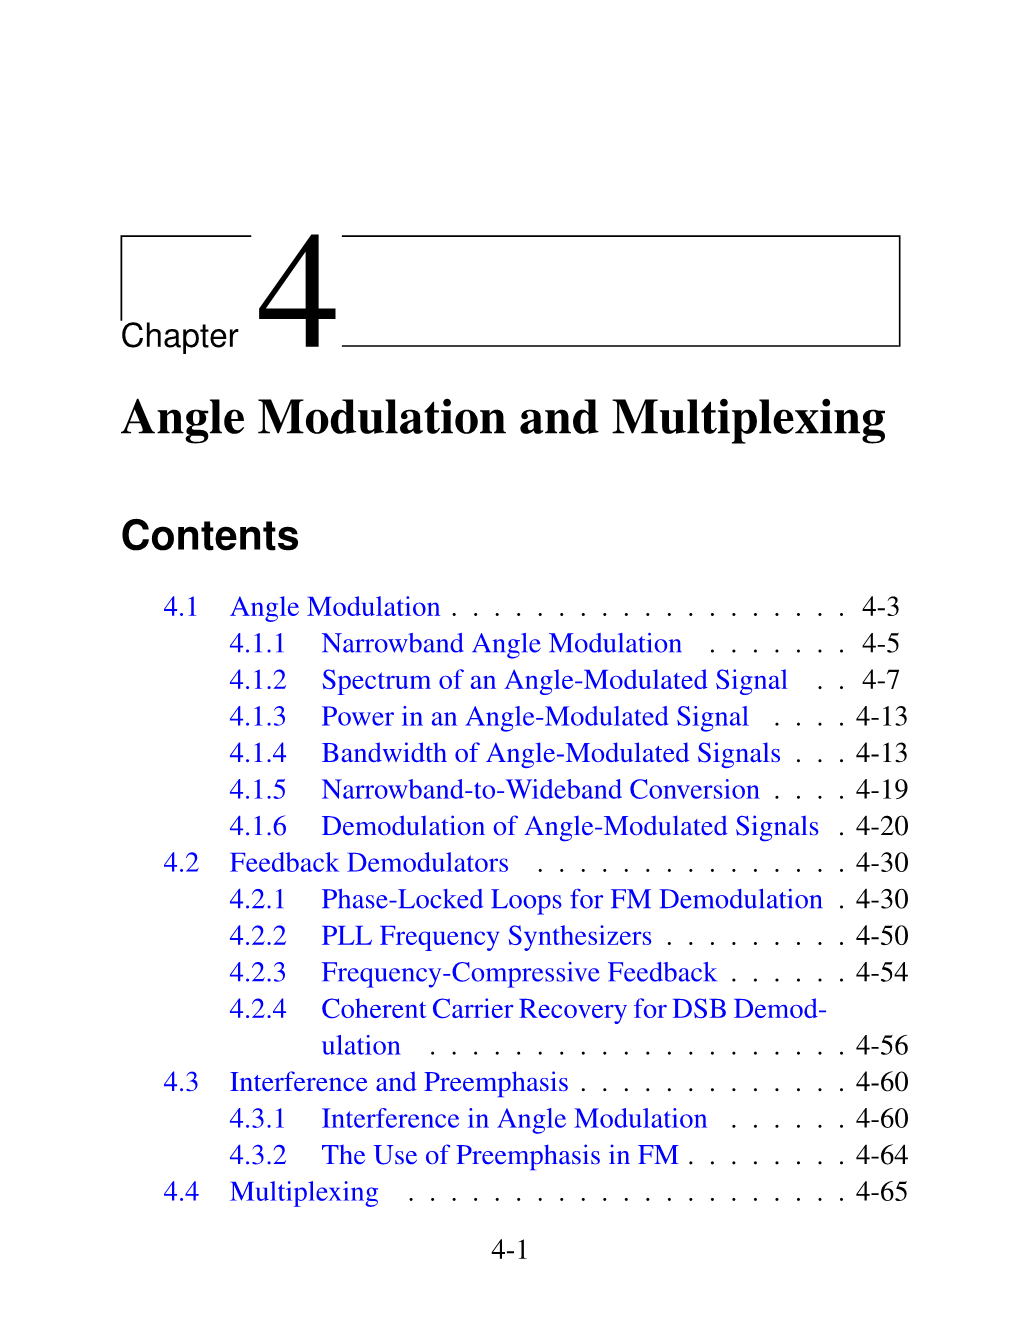 Angle Modulation and Multiplexing